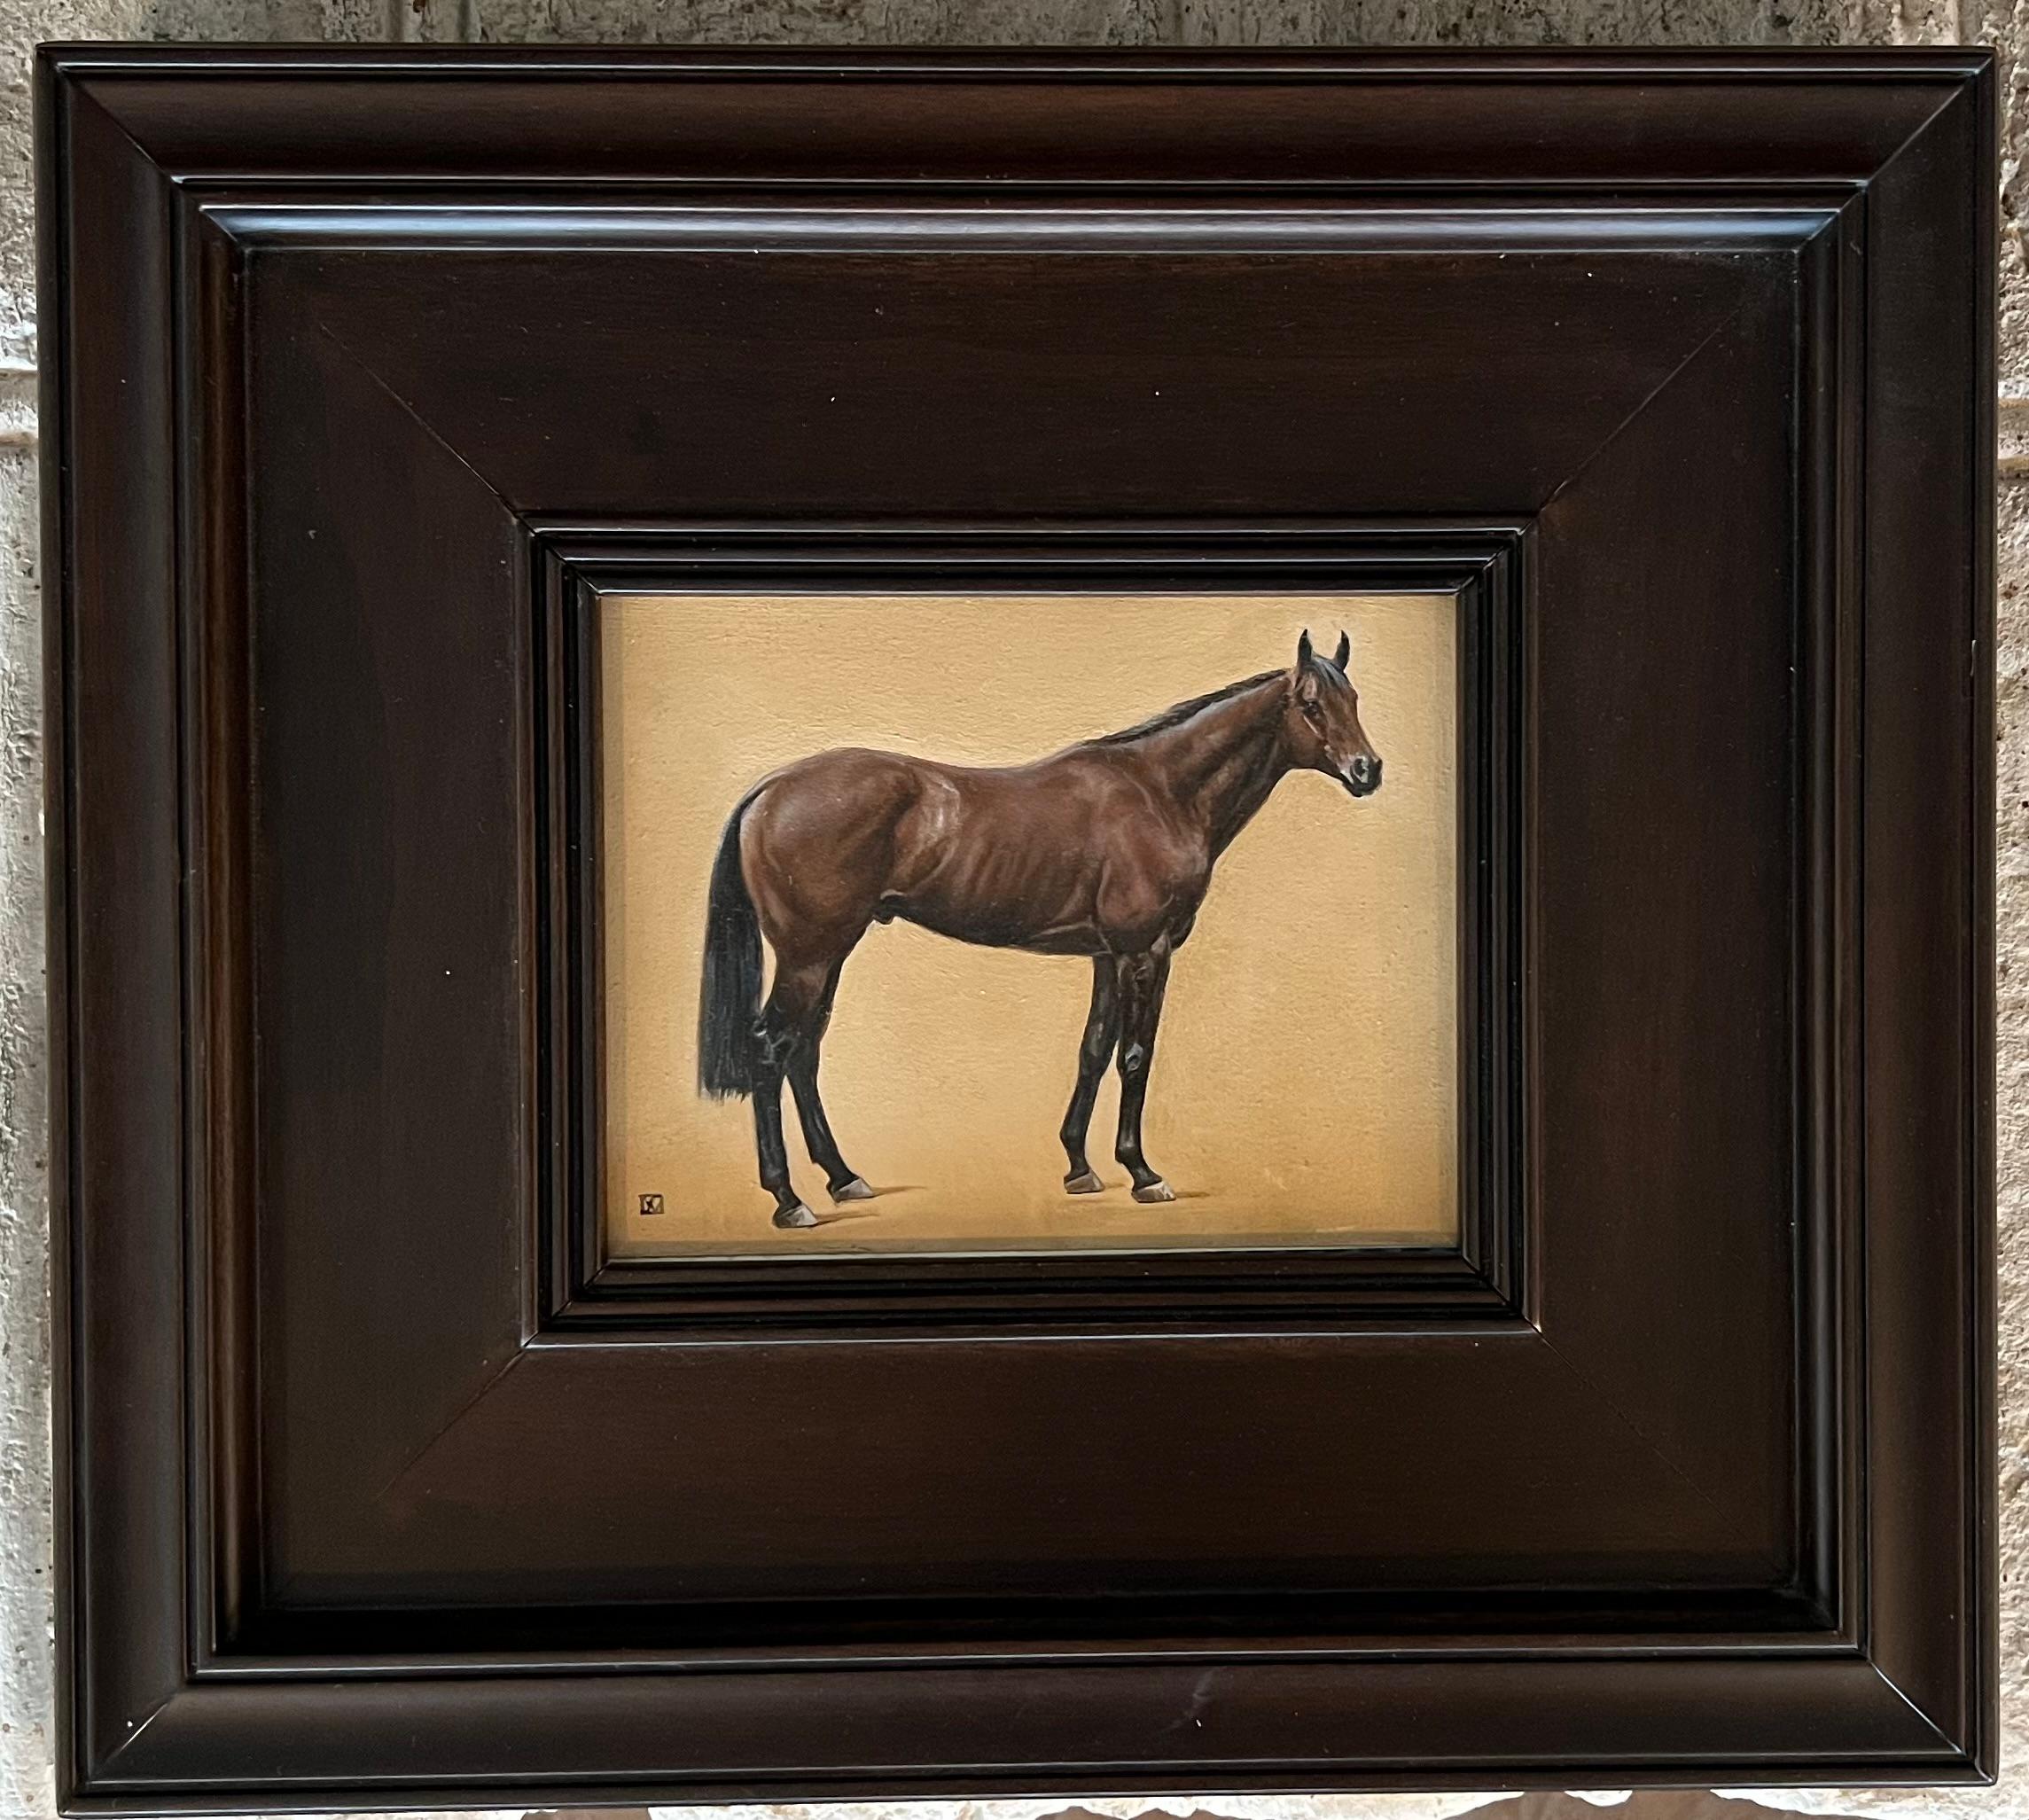 Realist Bay horse painting with a warm tan background with a 3 1/2